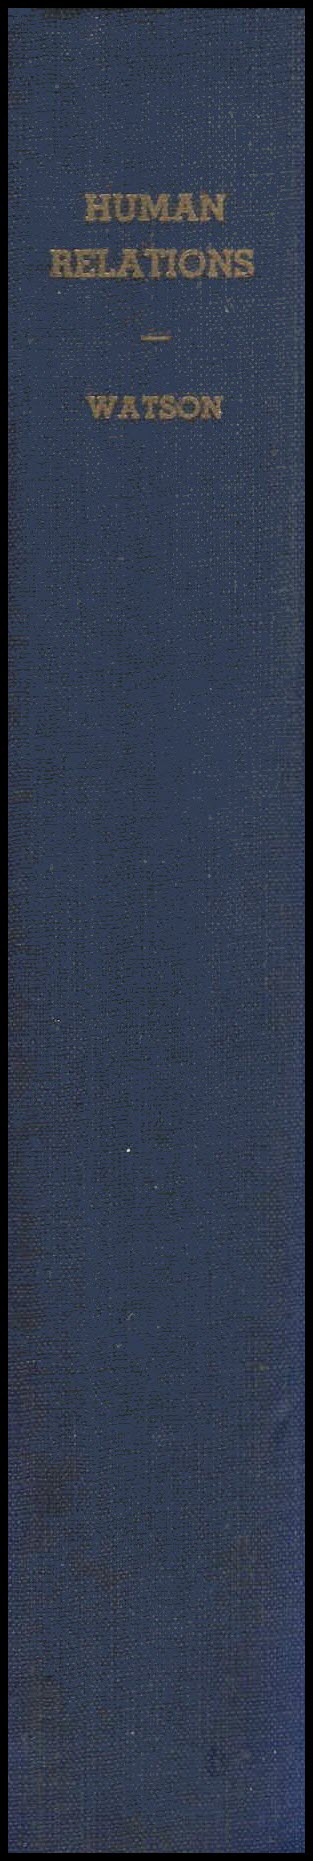 Picture of the spine of Thomas J. Watson Sr.'s 